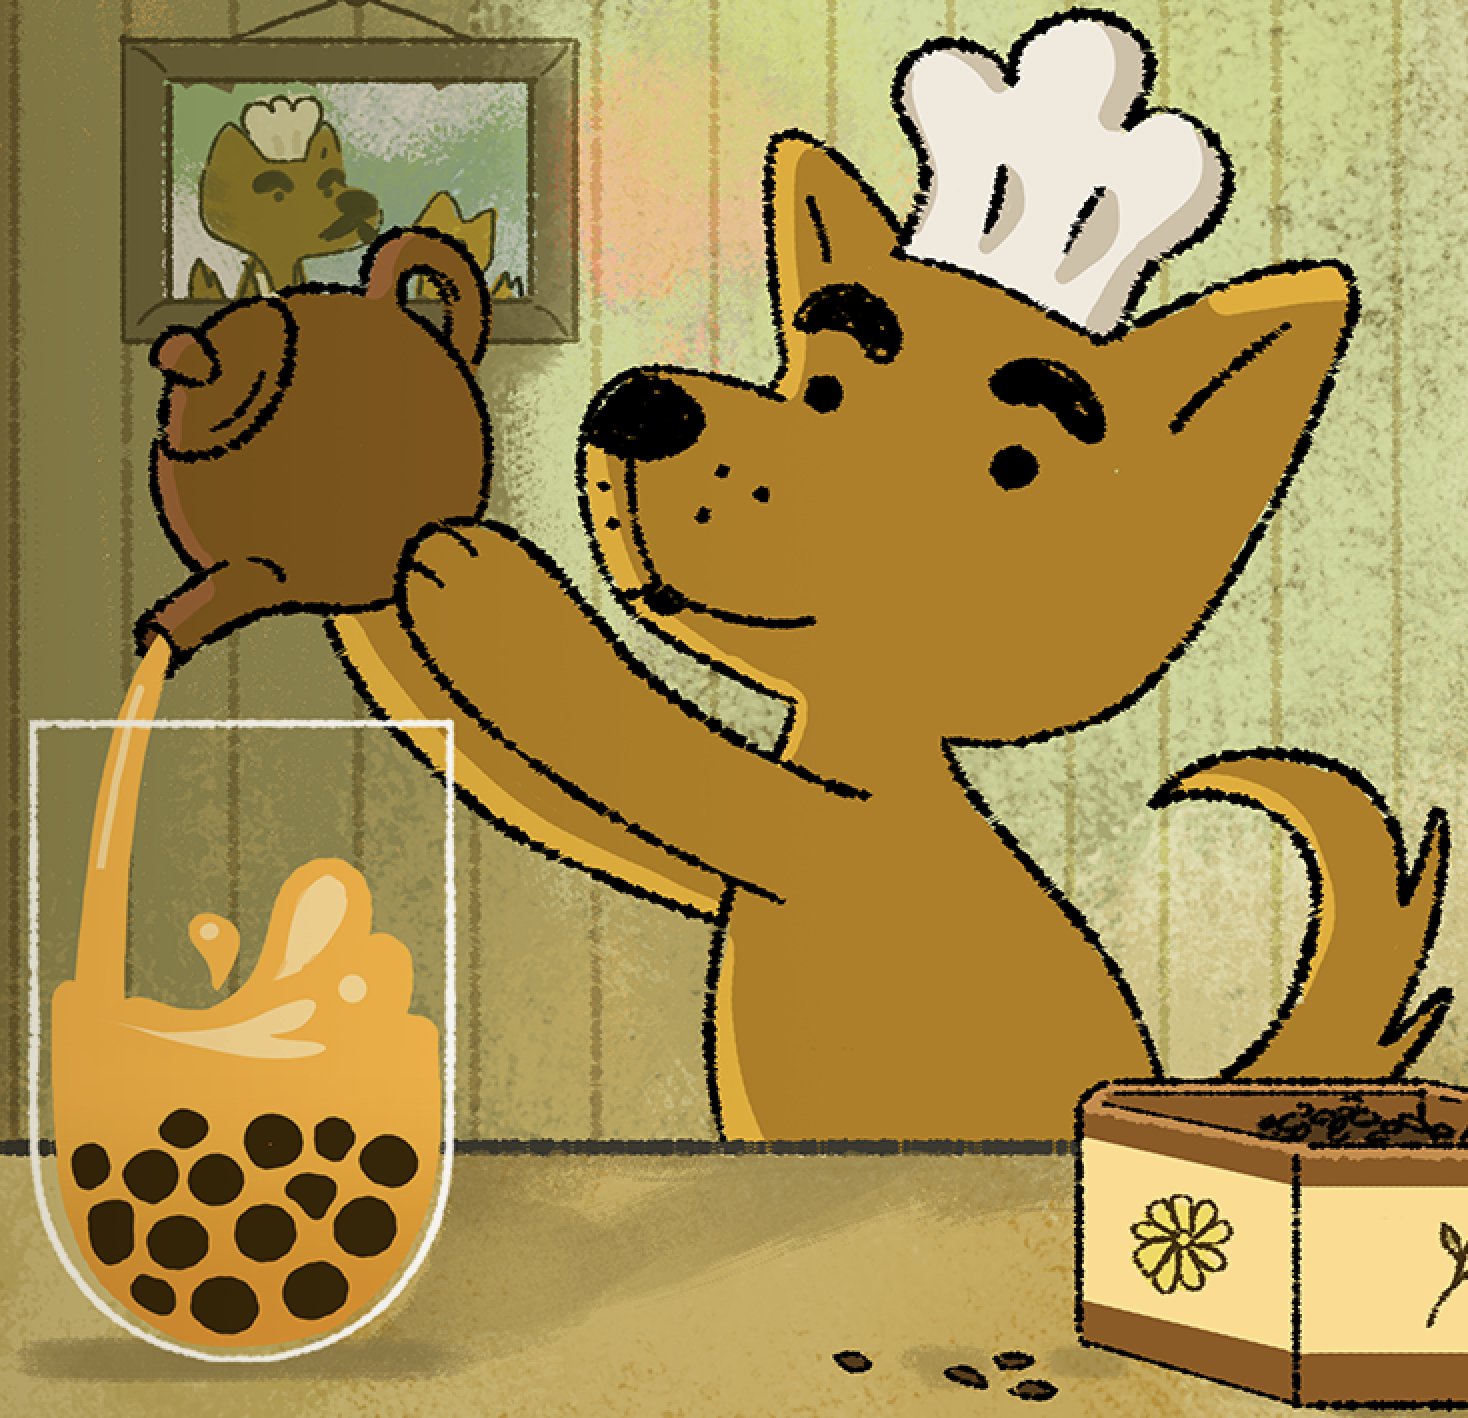 Brown dog with a white chefs hat on its head pouring boba tea from a brown tea kettle into a glass